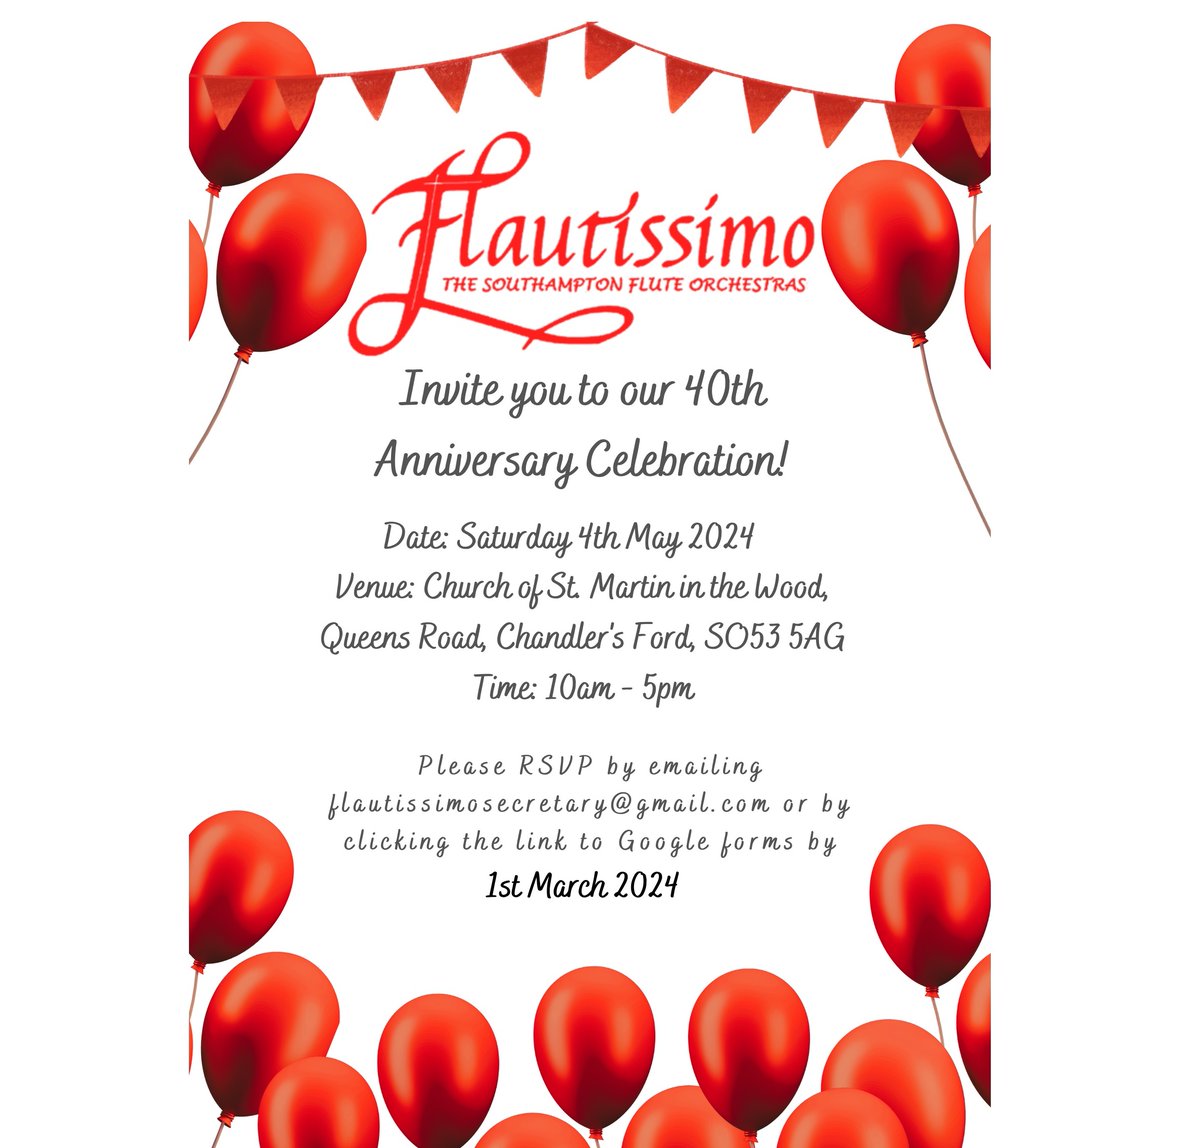 🎉 Join the celebration of Flautissimo's 40th Anniversary! 🎶✨ 📅 Save the Date: Saturday, May 4, 2024 🕙 Time: 10:00 AM - 5:00 PM 📍 Location: Church of St Martin in the Wood, Chandler’s Ford